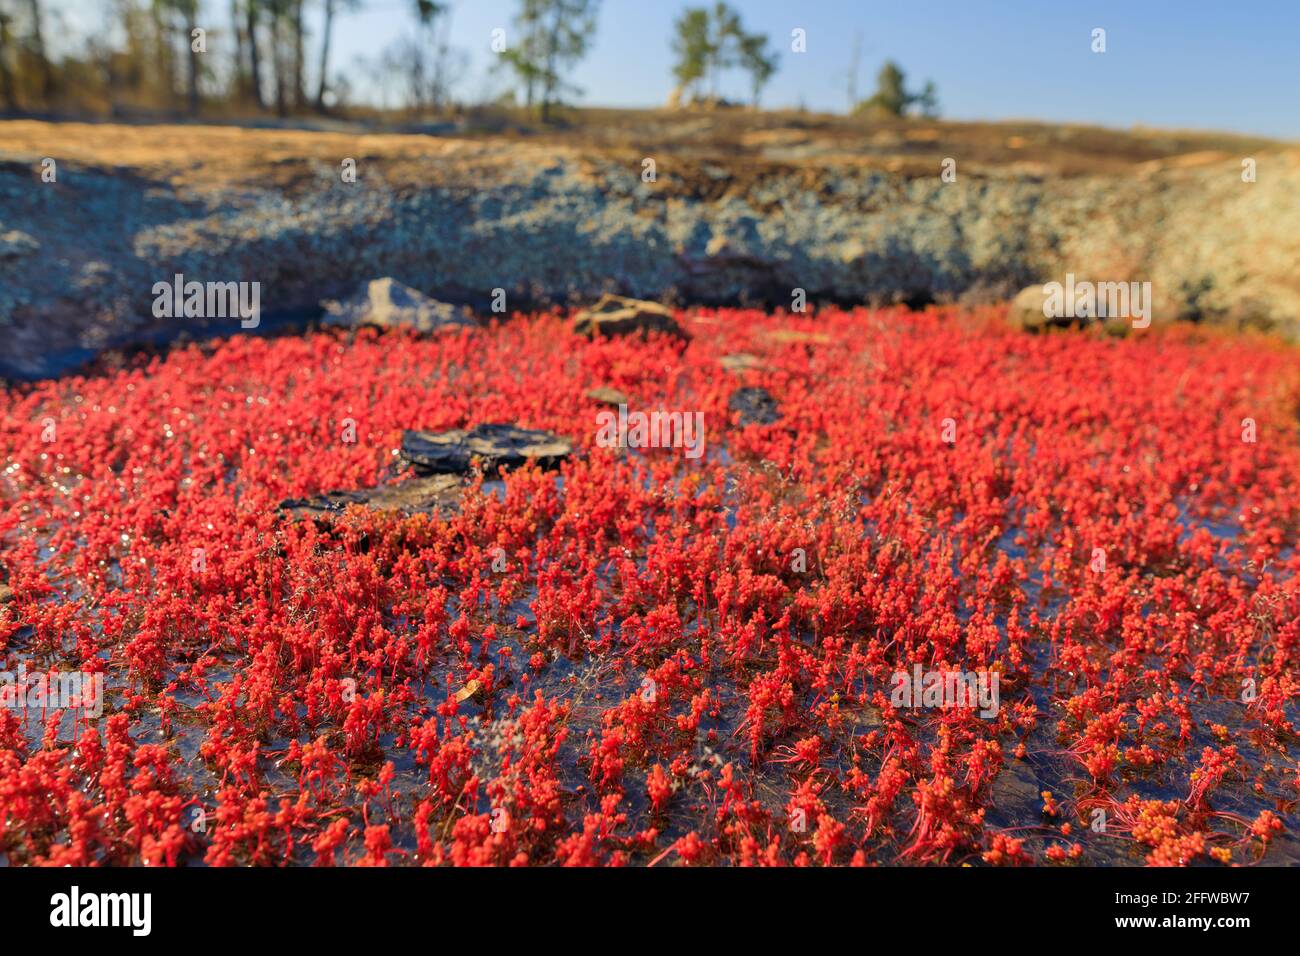 Diamorpha flowers in bloom on a mountainside in Georgia. Stock Photo